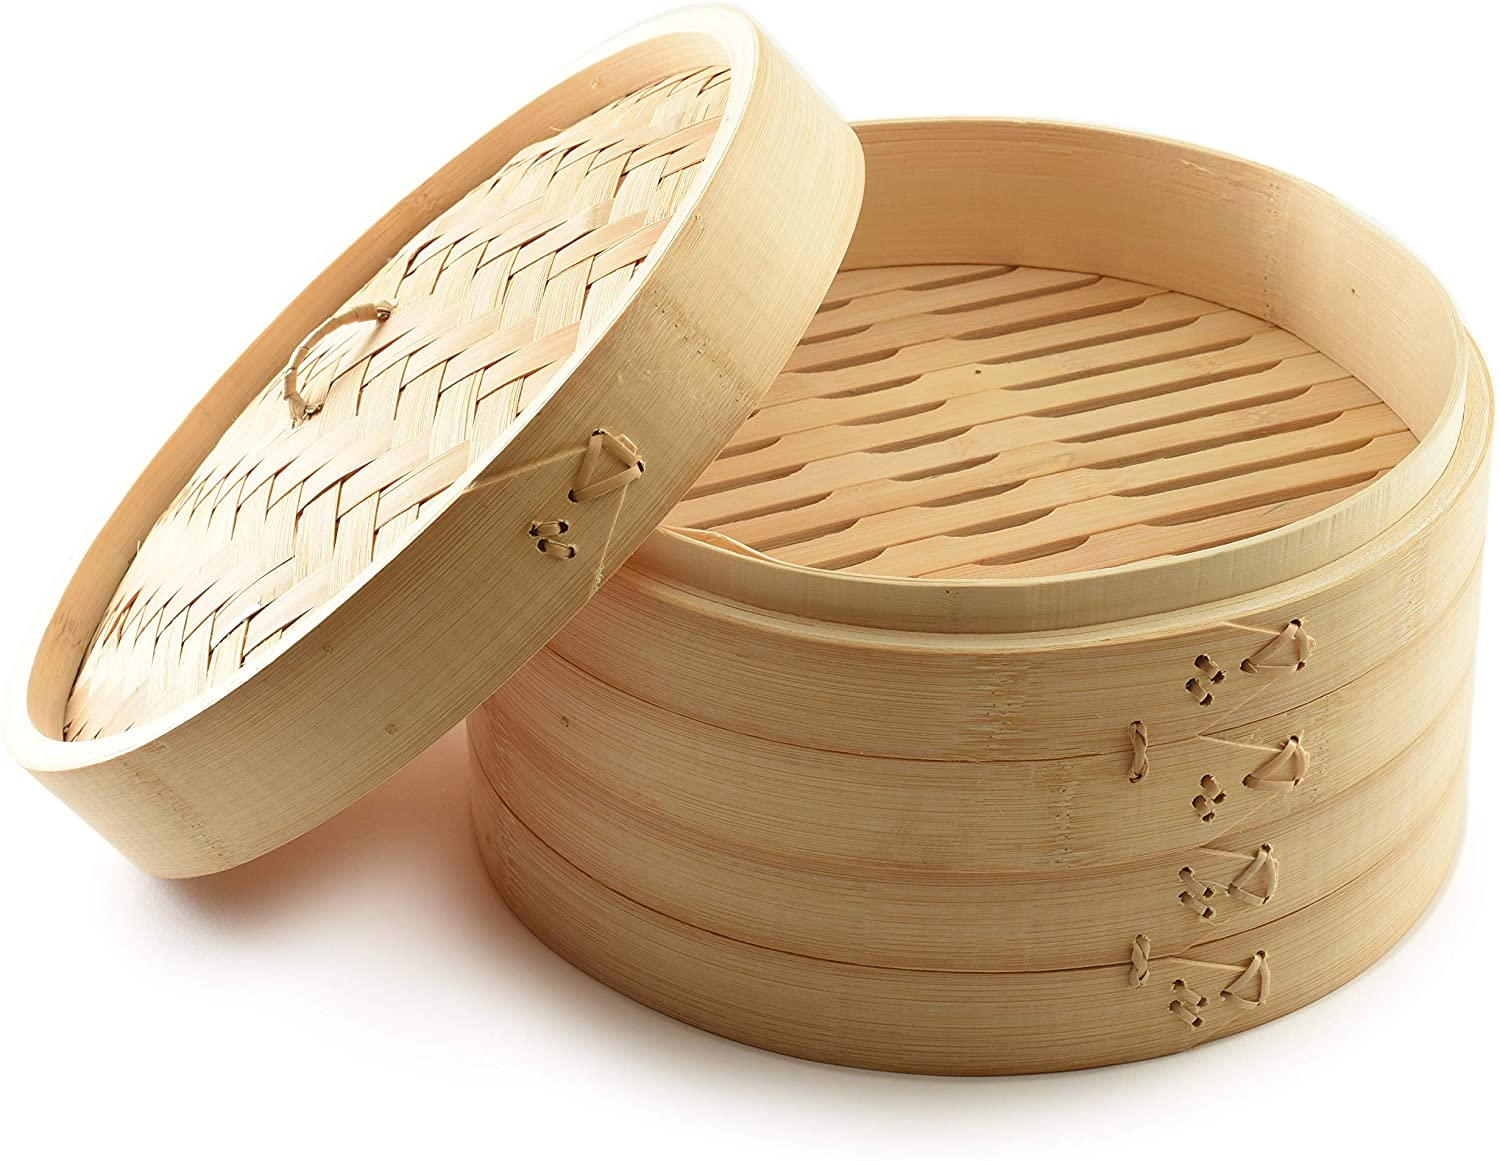 Bamboo Steamer: You can steam anything in this.